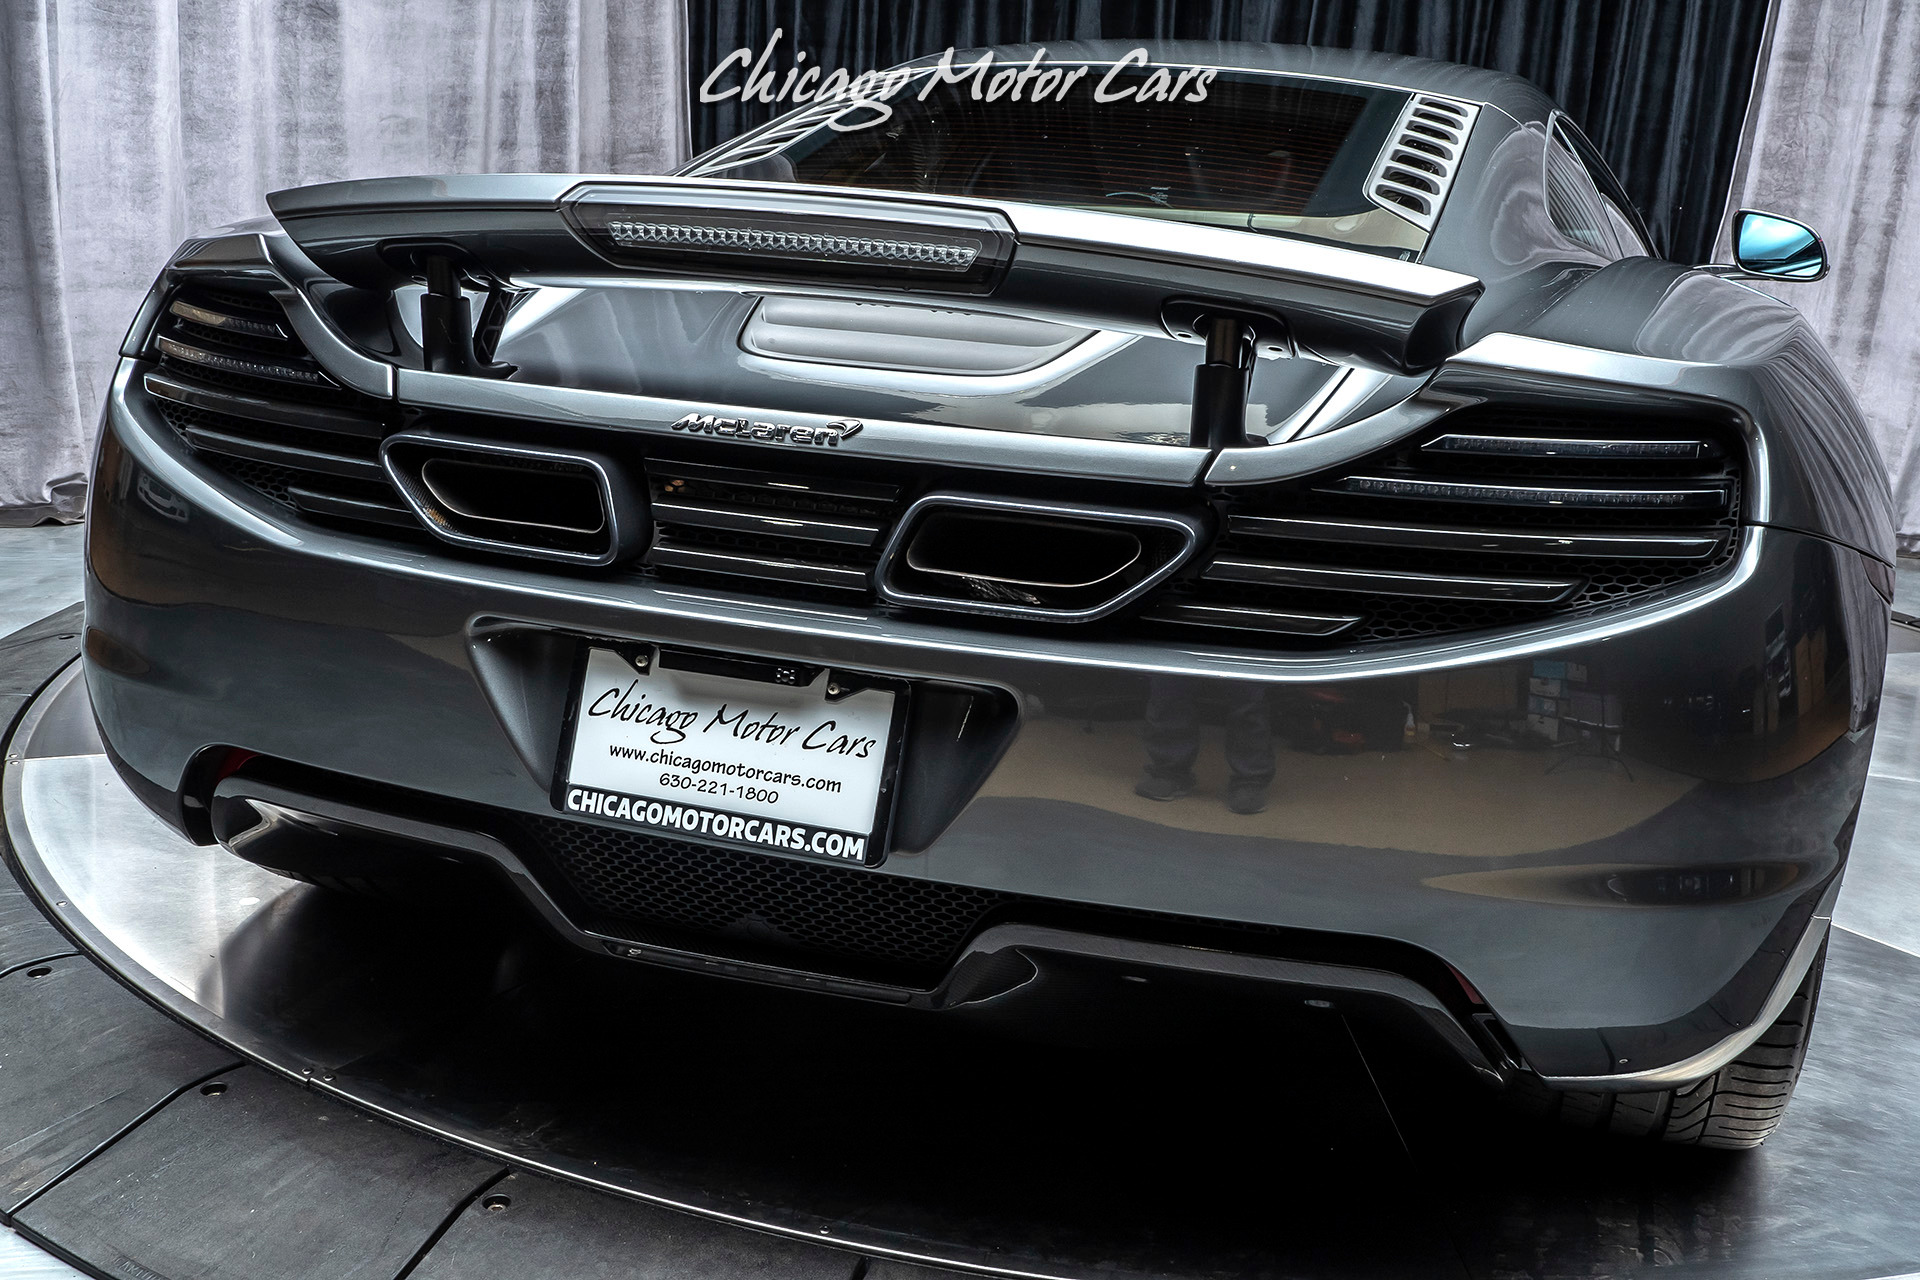 Used-2012-McLaren-MP4-12C-Coupe-MSRP-291K-TRANSFERABLE-WARRANTY-Just-Serviced